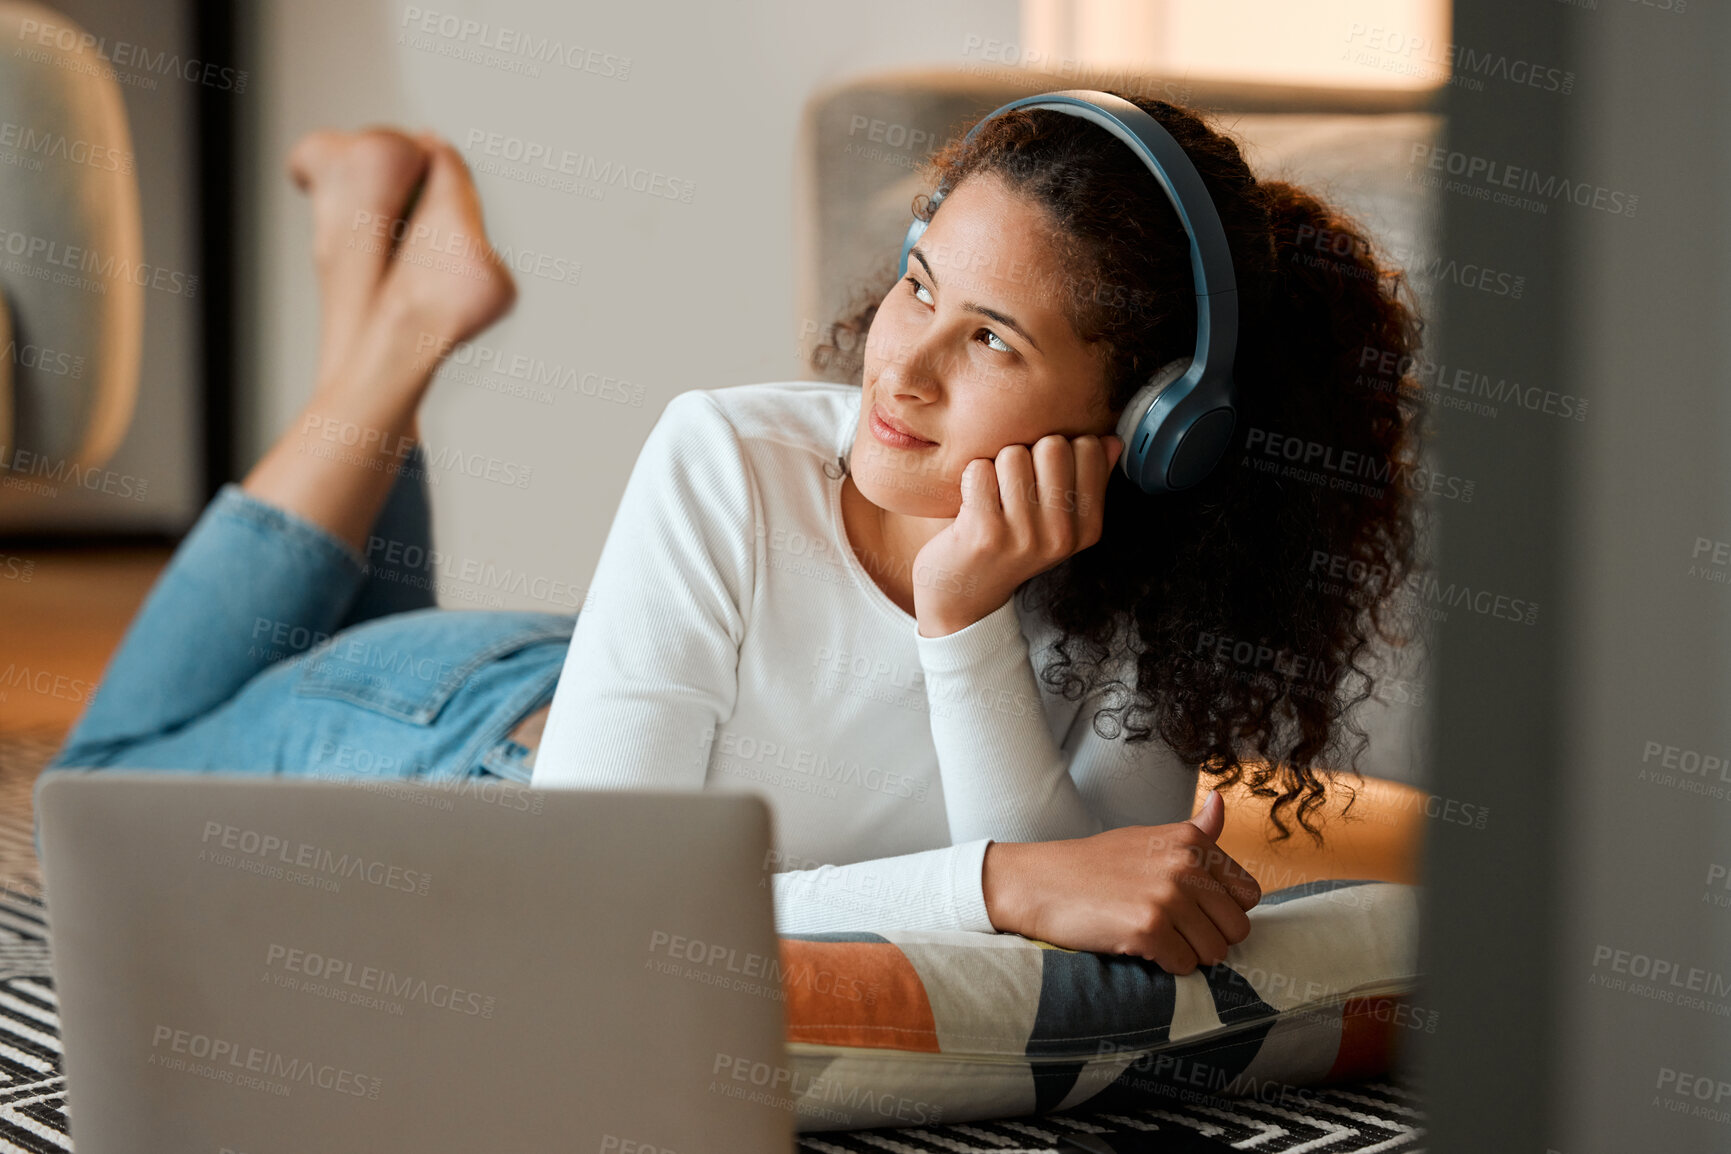 Buy stock photo woman dreaming and listening to music. Young woman listening to music through headphones on her laptop. Girl lying on the floor thinking. Young woman enjoying her music on a computer at home